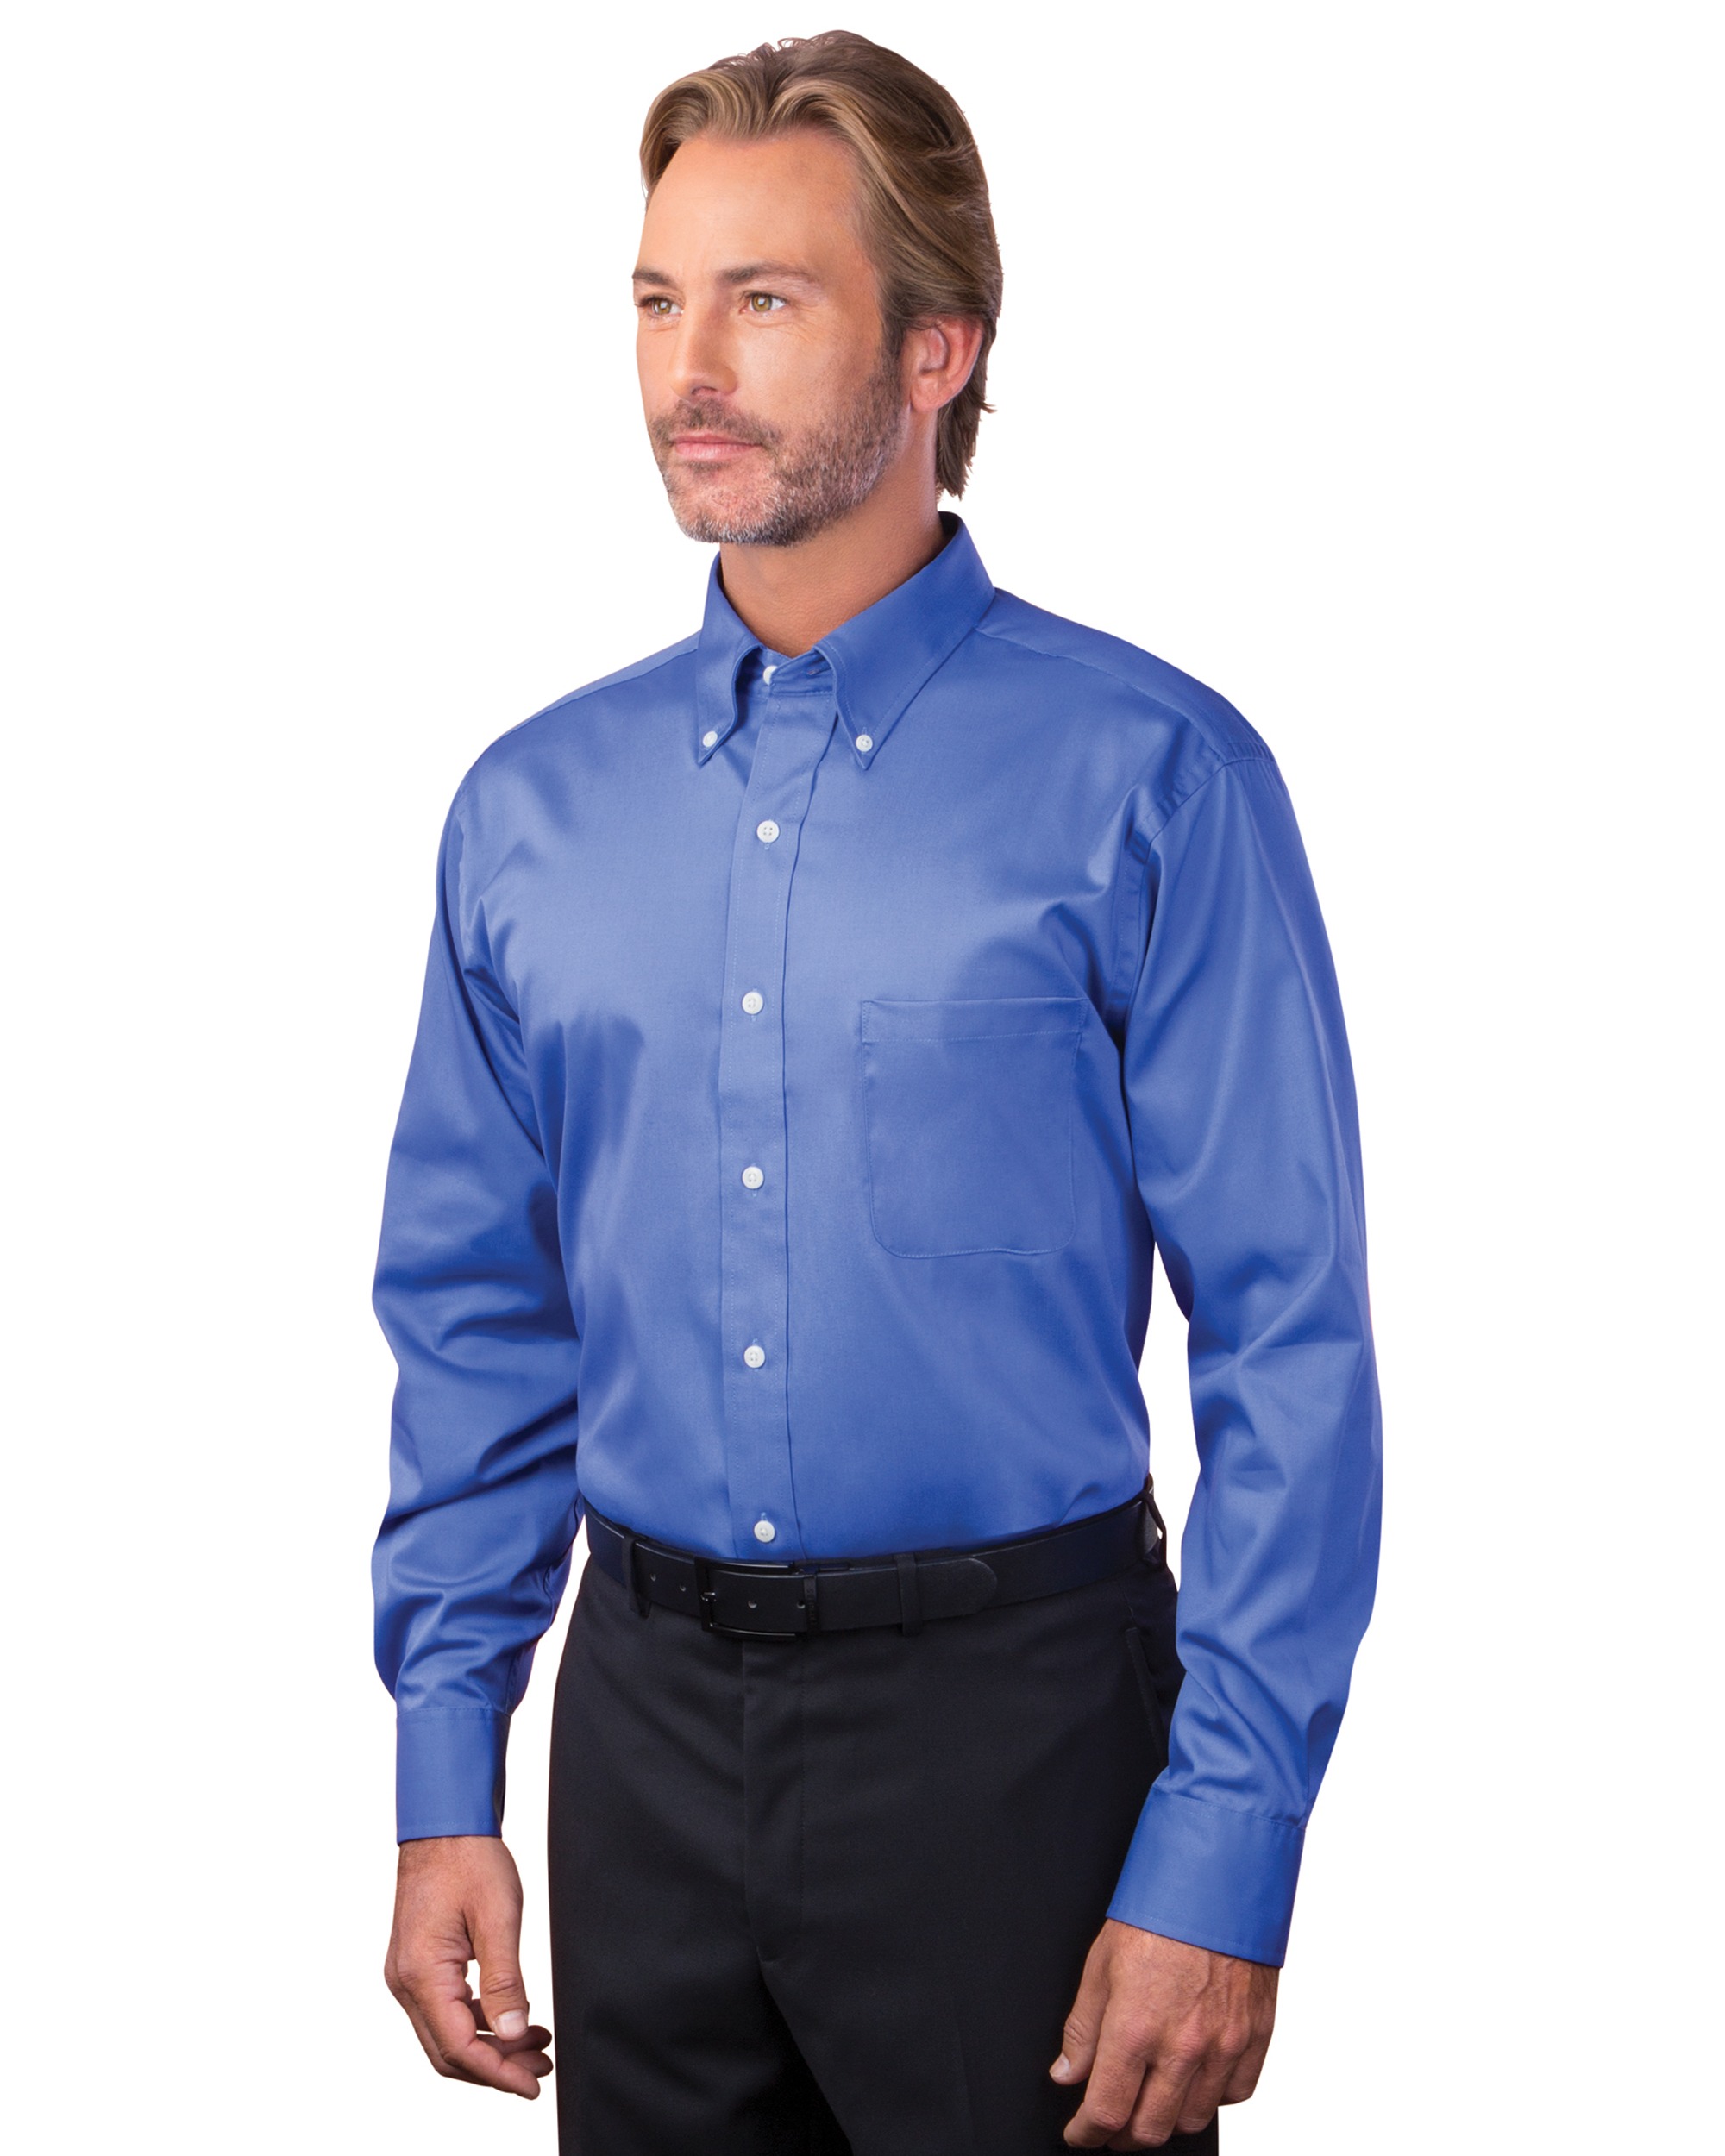 VH479 - Pinpoint Oxford Long Sleeve Shirt - One Stop